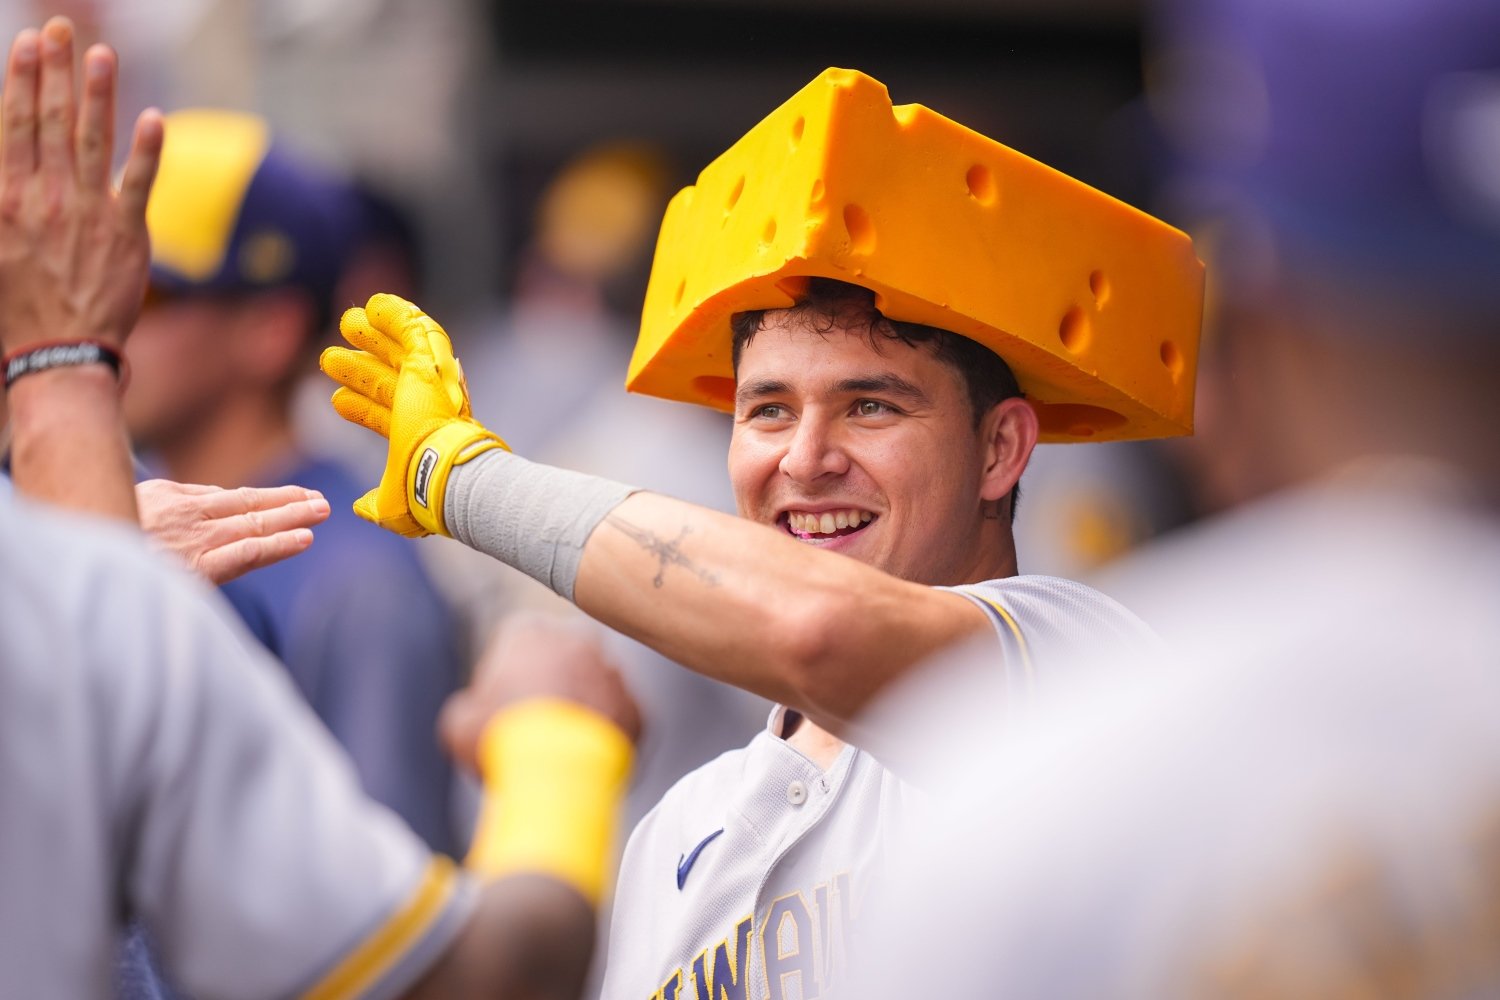 Milwaukee Brewers: What Happened to the Cheesehead?